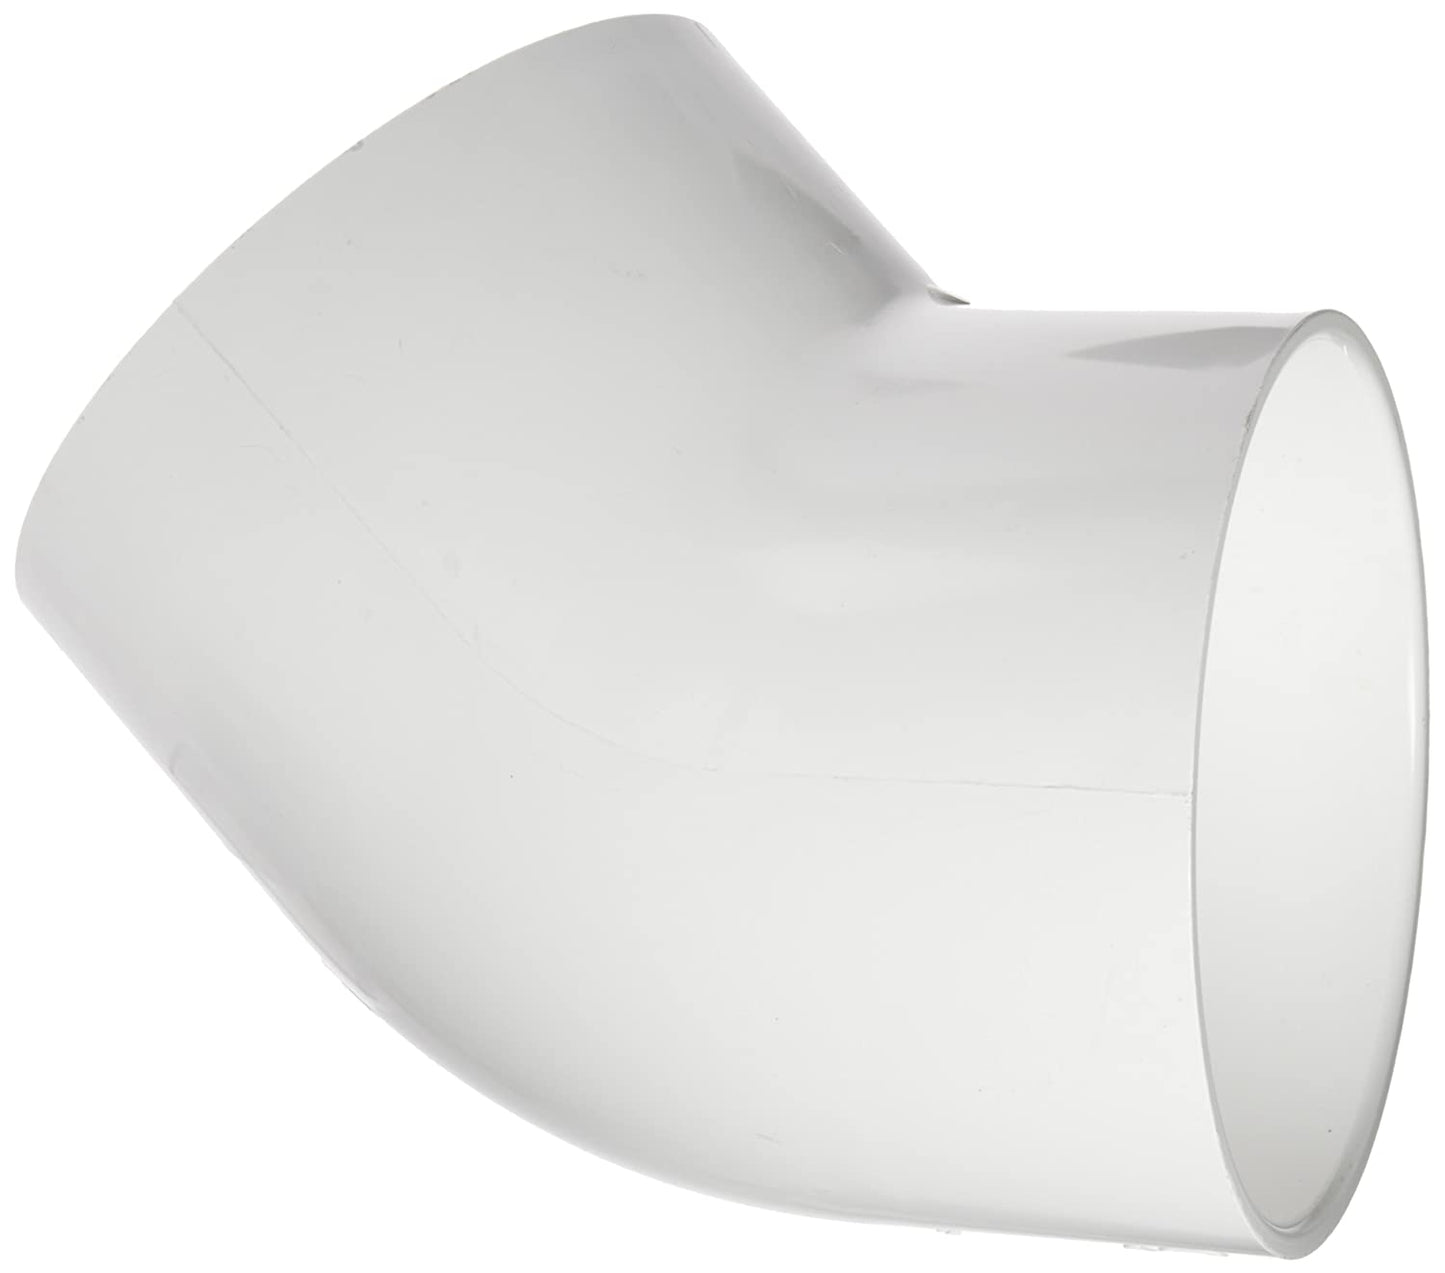 417-005 - 1/2" Socket PVC Pipe Fitting, 45 Degree Elbow, Schedule 40,